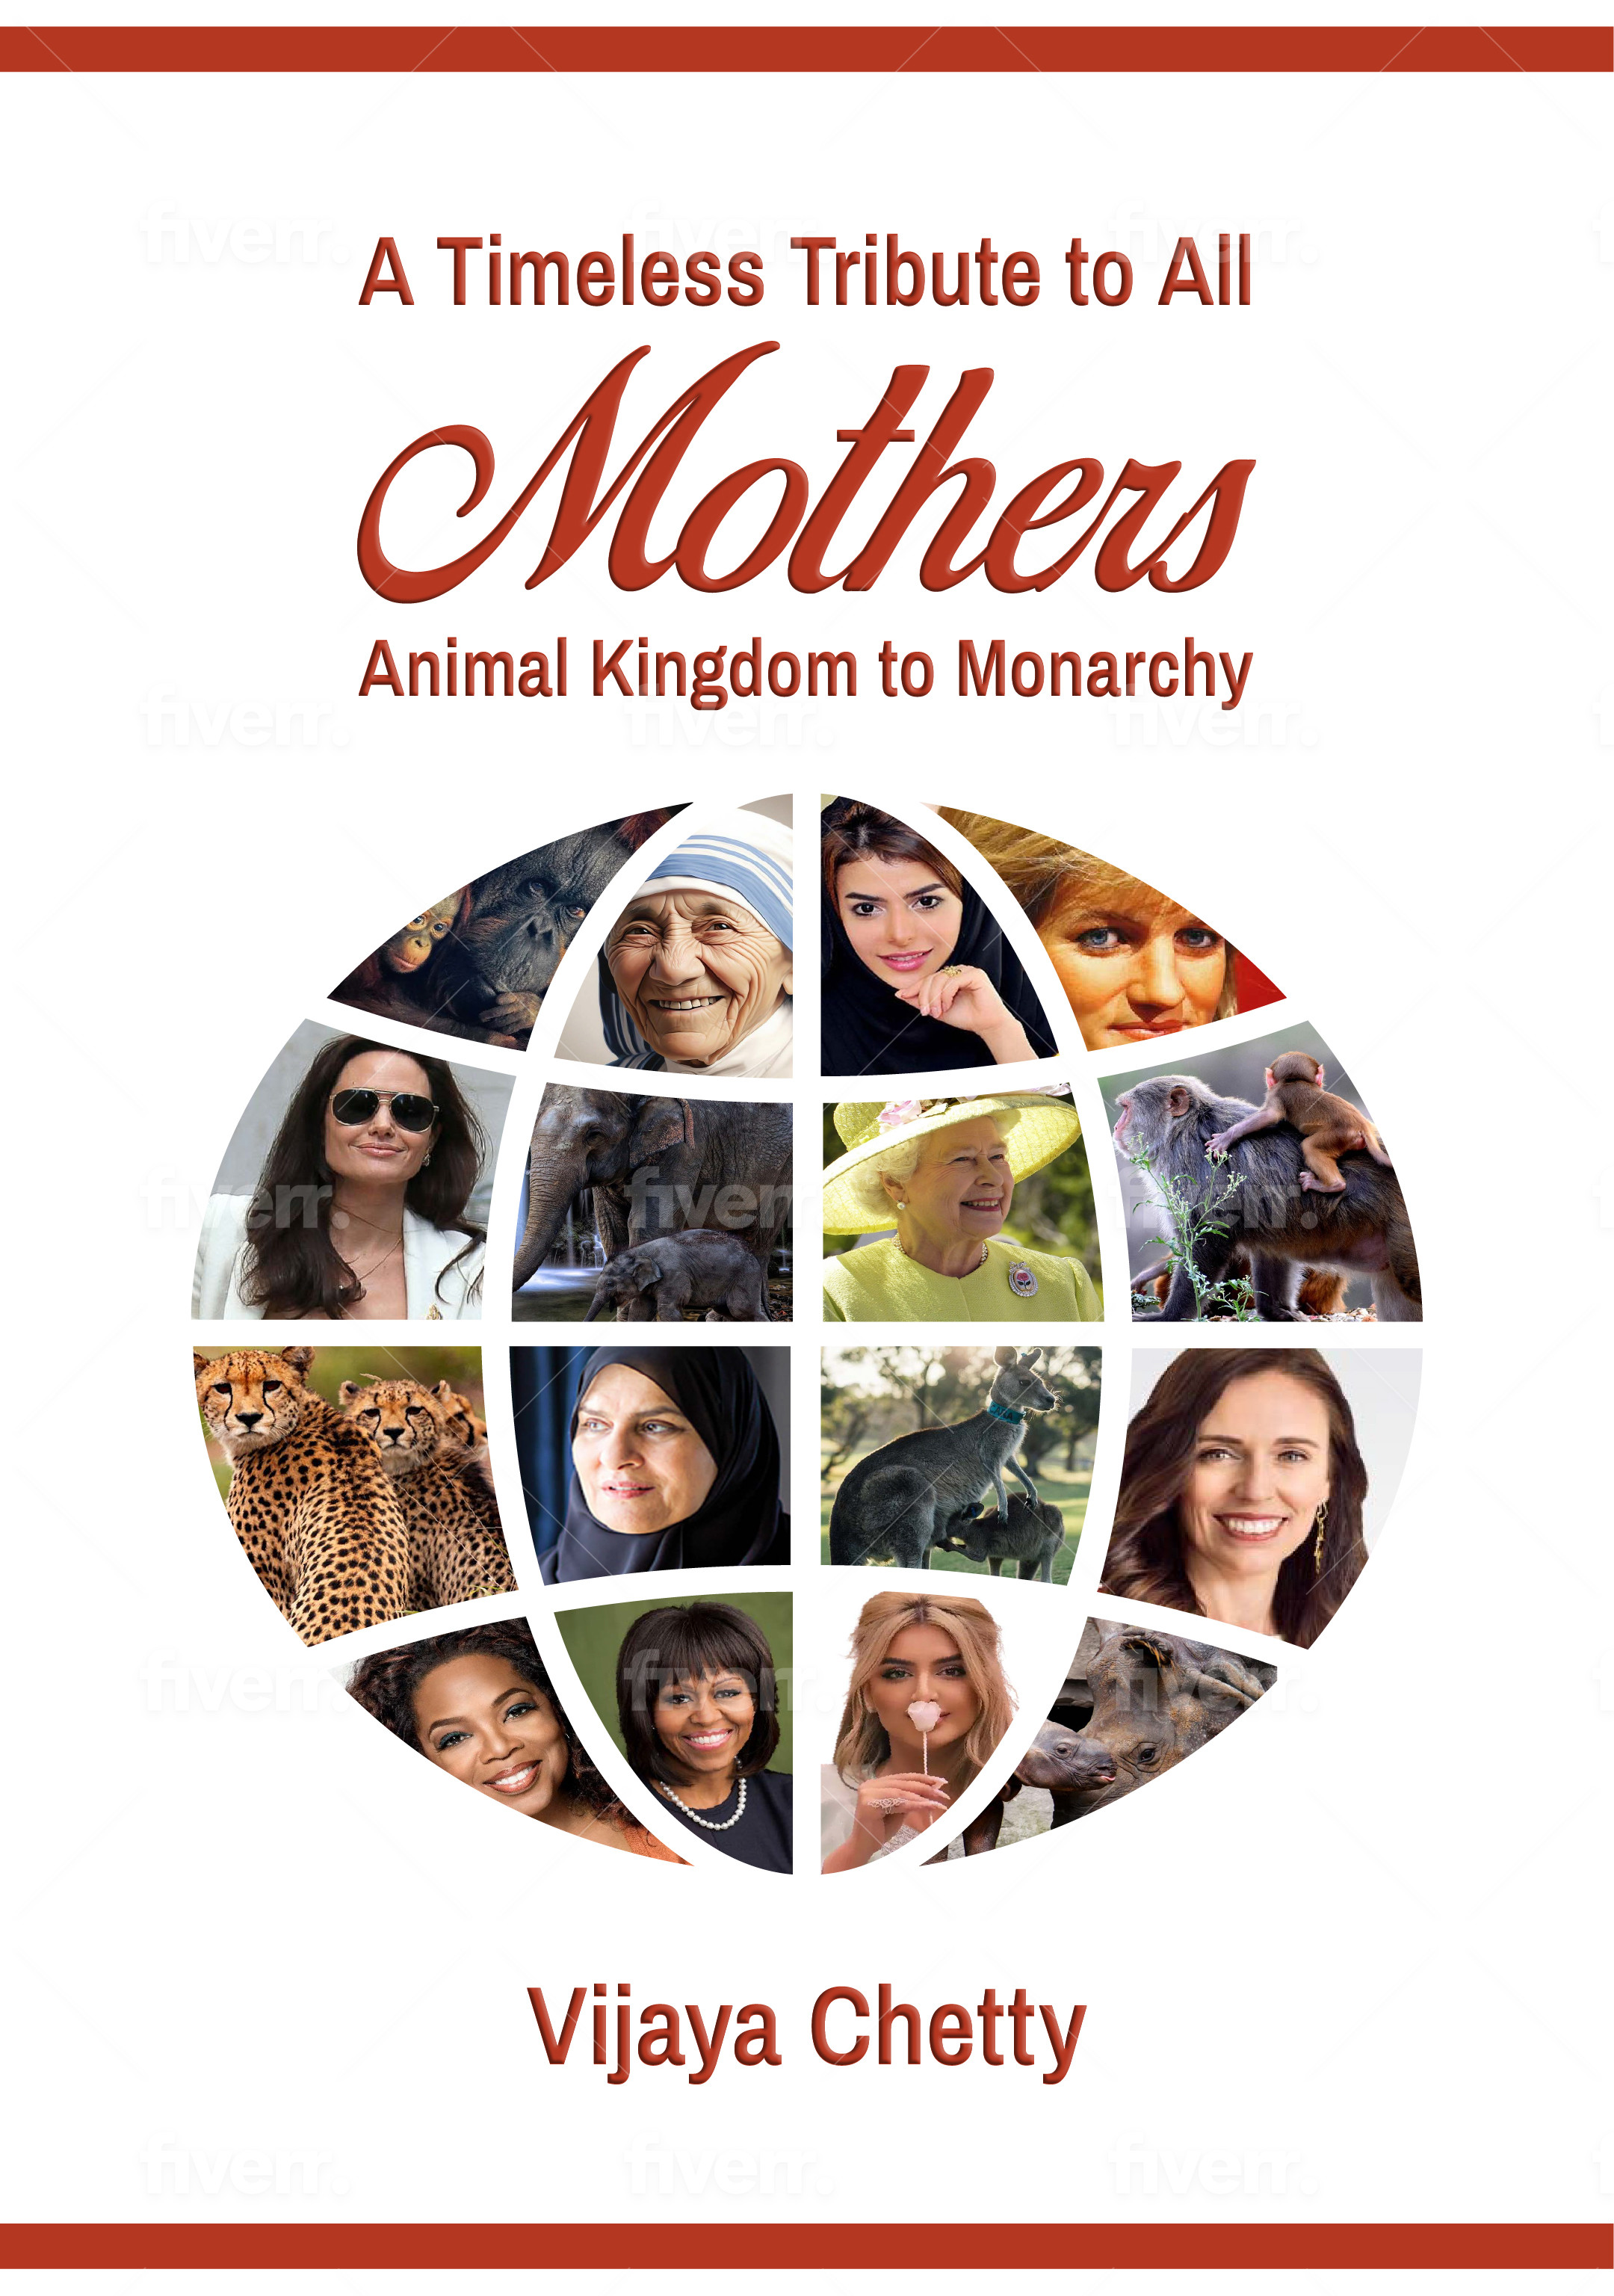 "A Timeless Tribute to All Mothers - Queens to Creatures" Celebrates Universal Motherhood